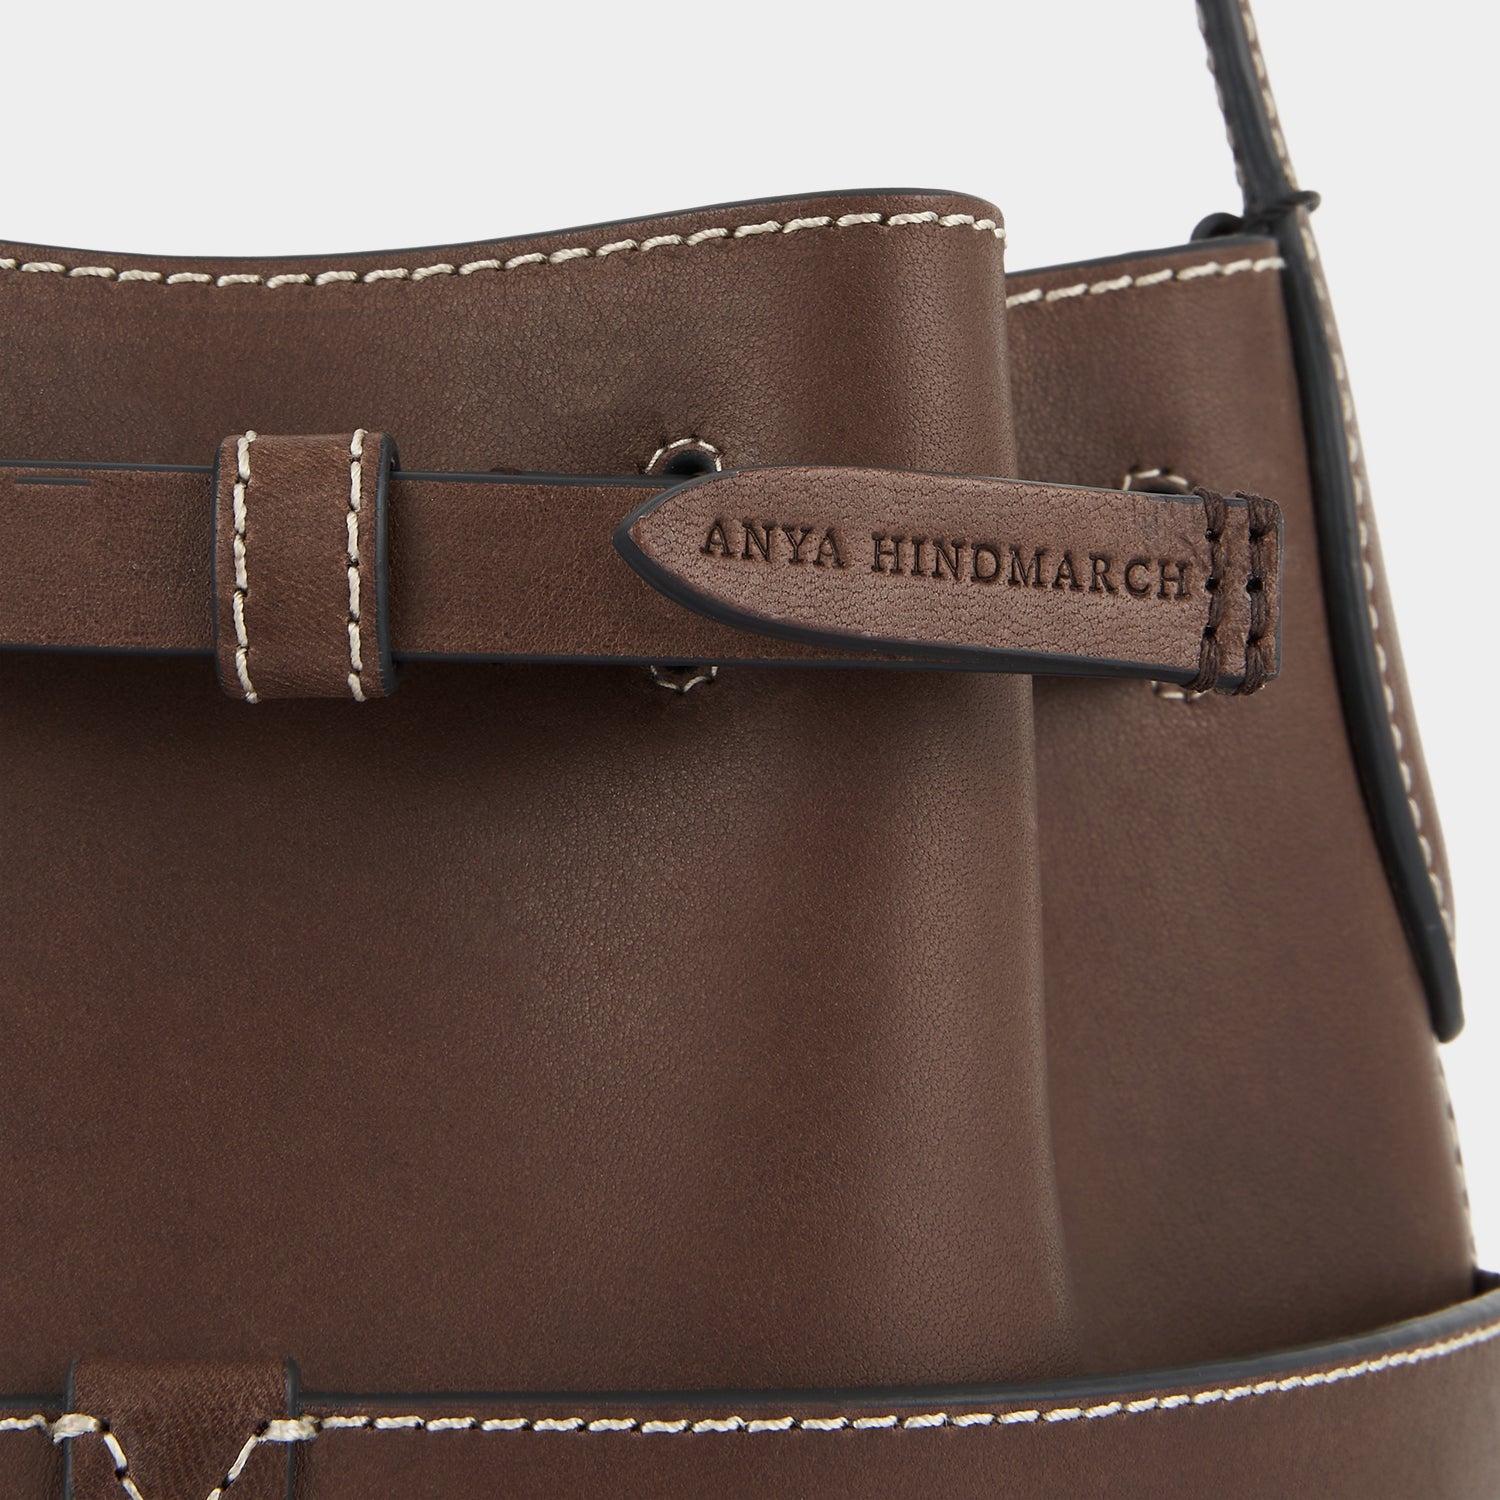 「Return to Nature」バケットバッグ スモール -

                  
                    Compostable Leather in Truffle -
                  

                  Anya Hindmarch JP
